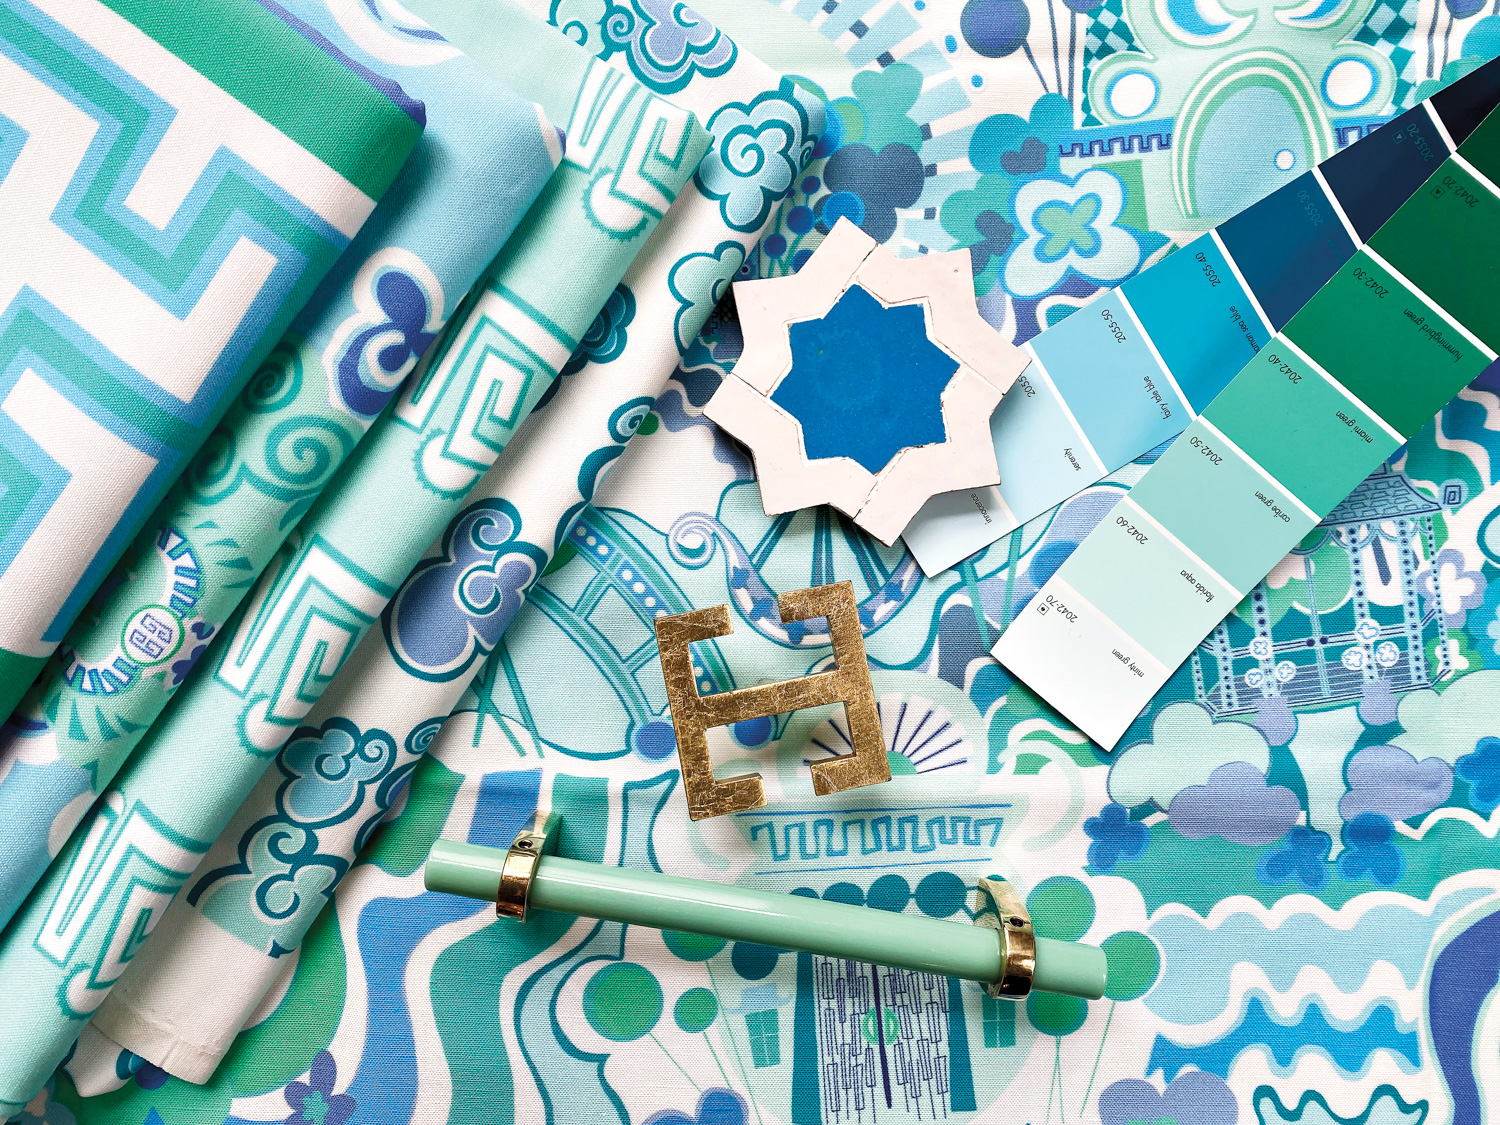 Vibrant blue-and-green patterned textiles layered with paint chips, tiles and accent pulls on top